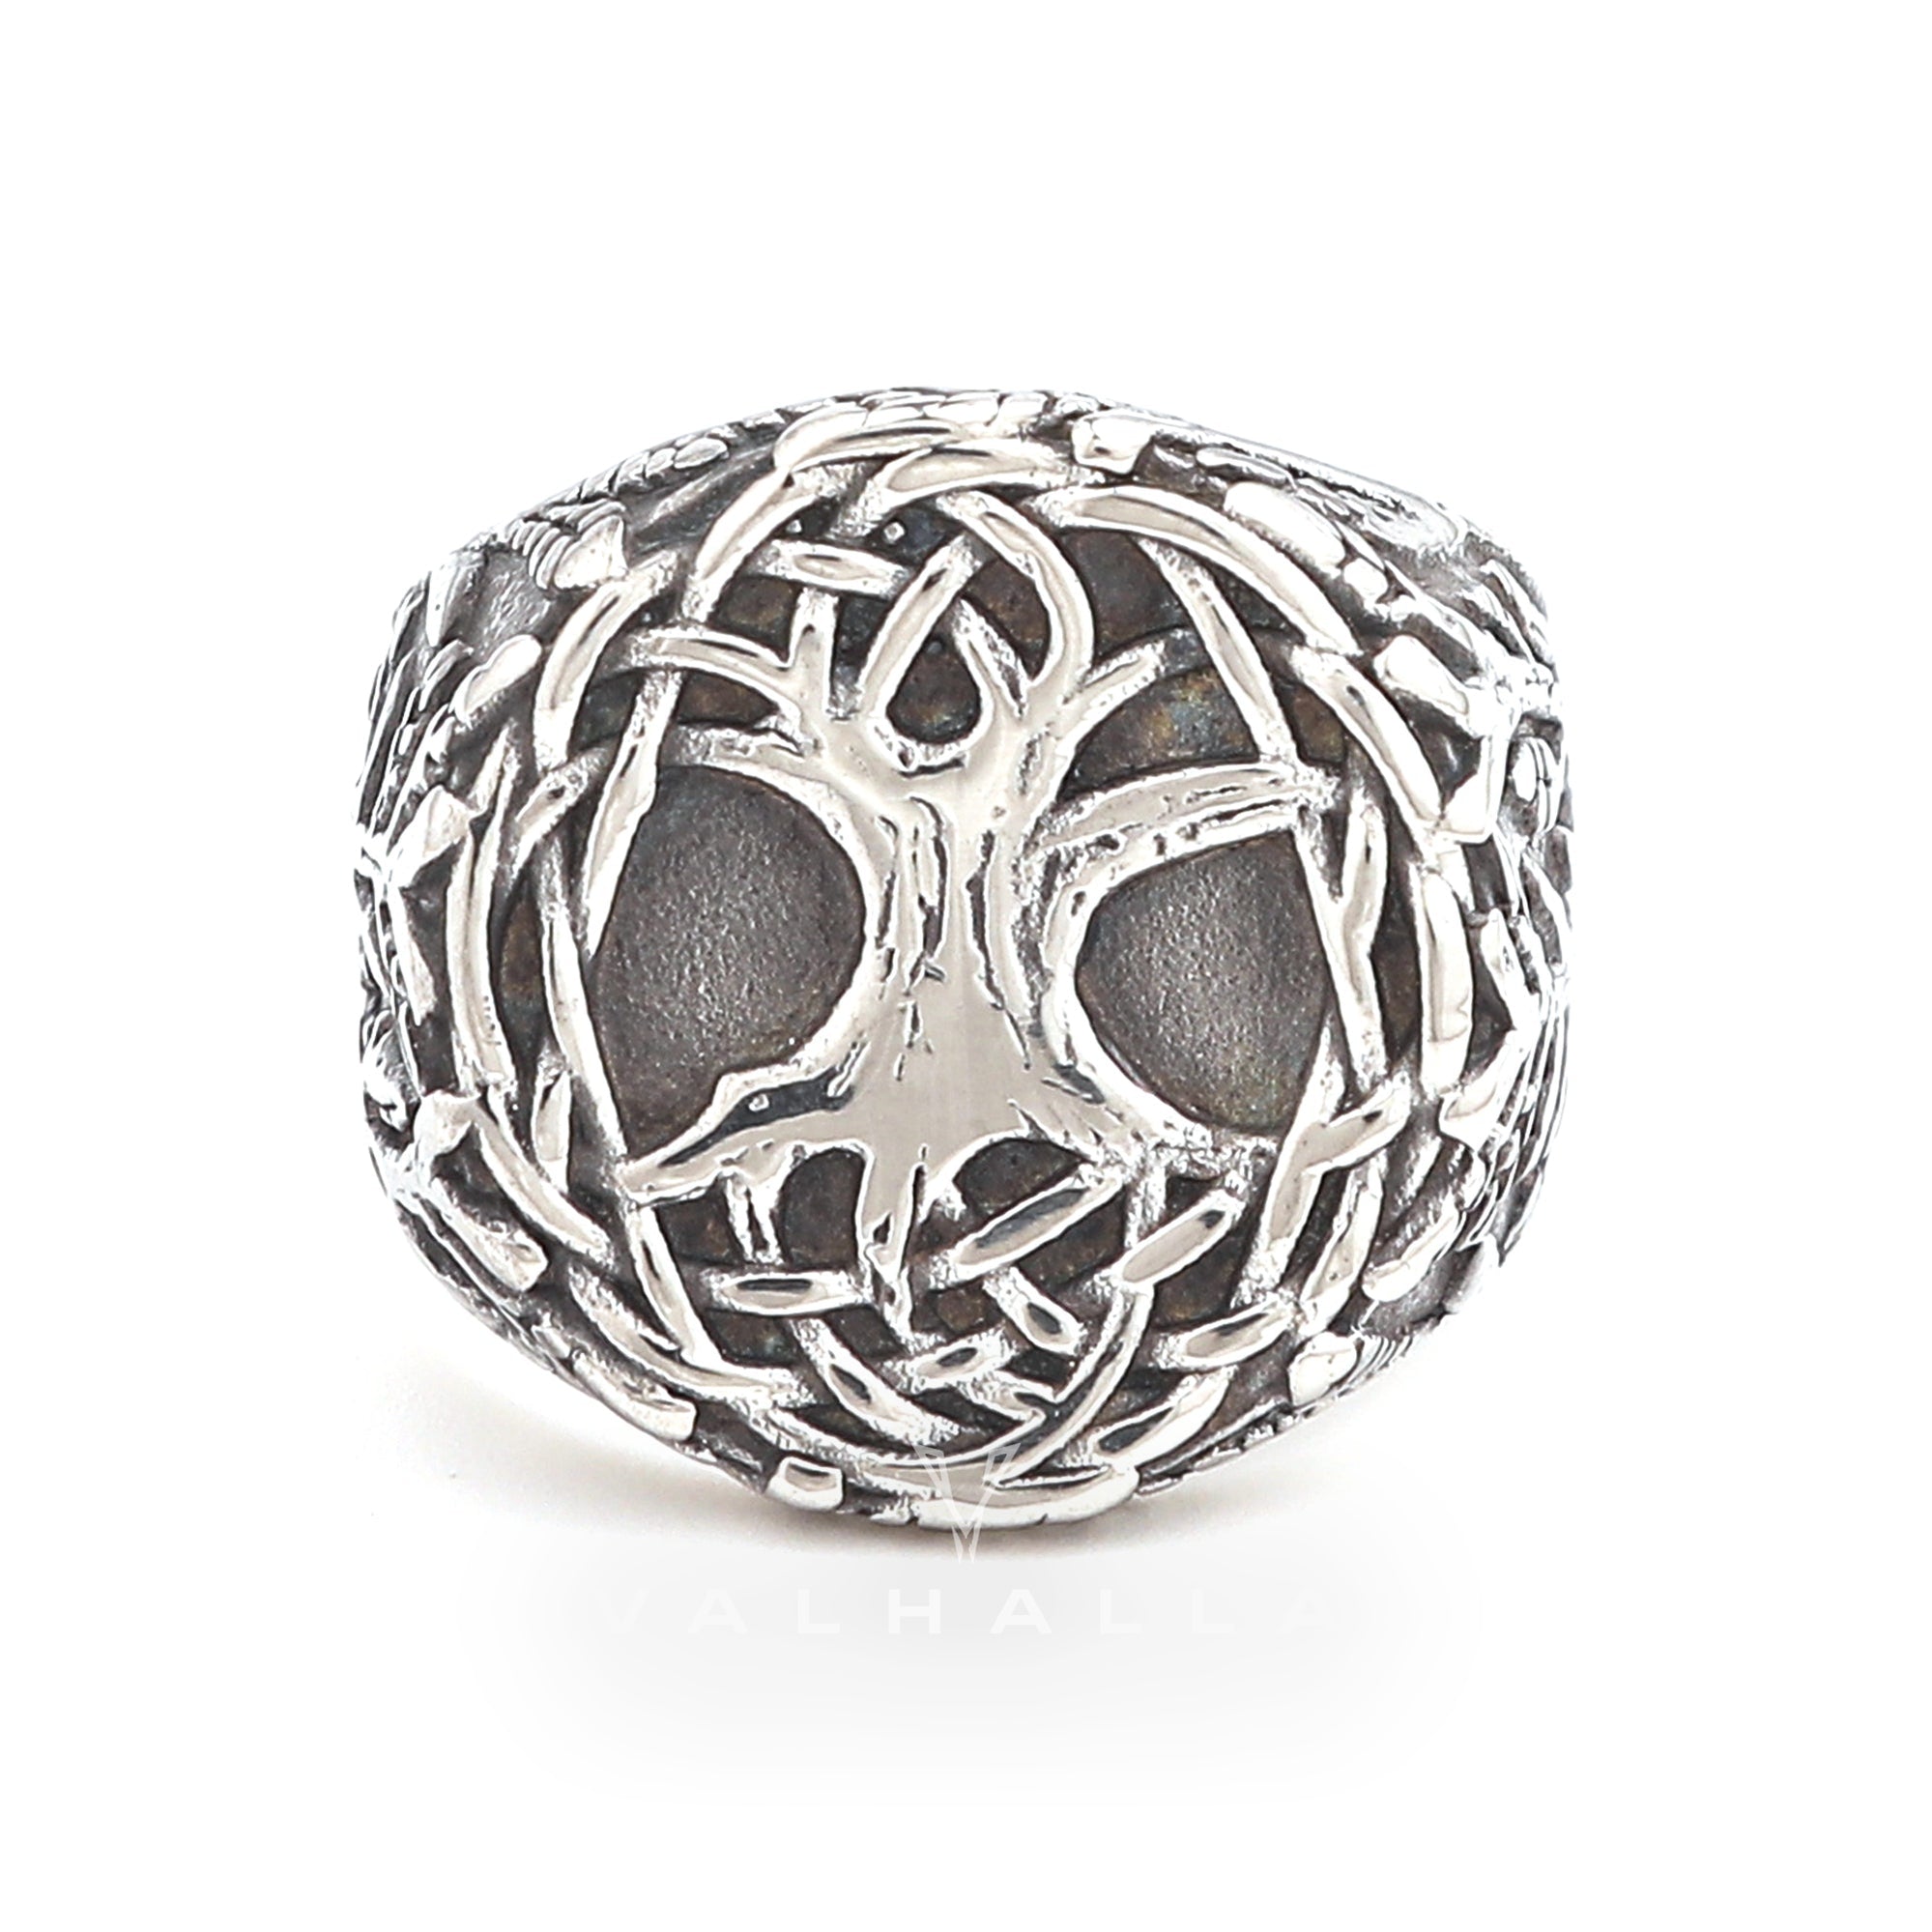 Handcrafted Stainless Steel Yggdrasil / Tree of Life Signet Ring